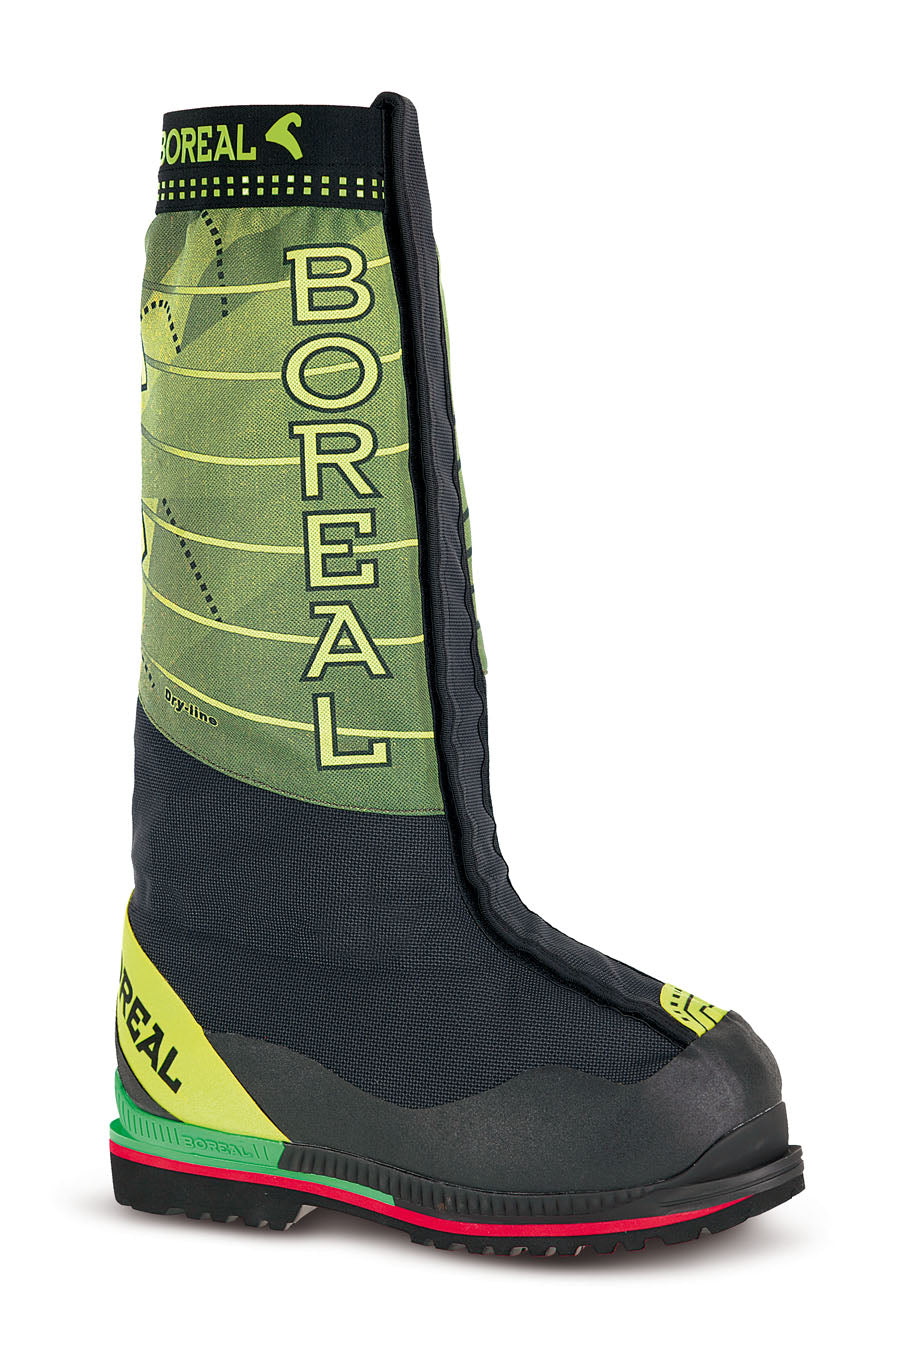 Boreal G1 Expedition Double Boot